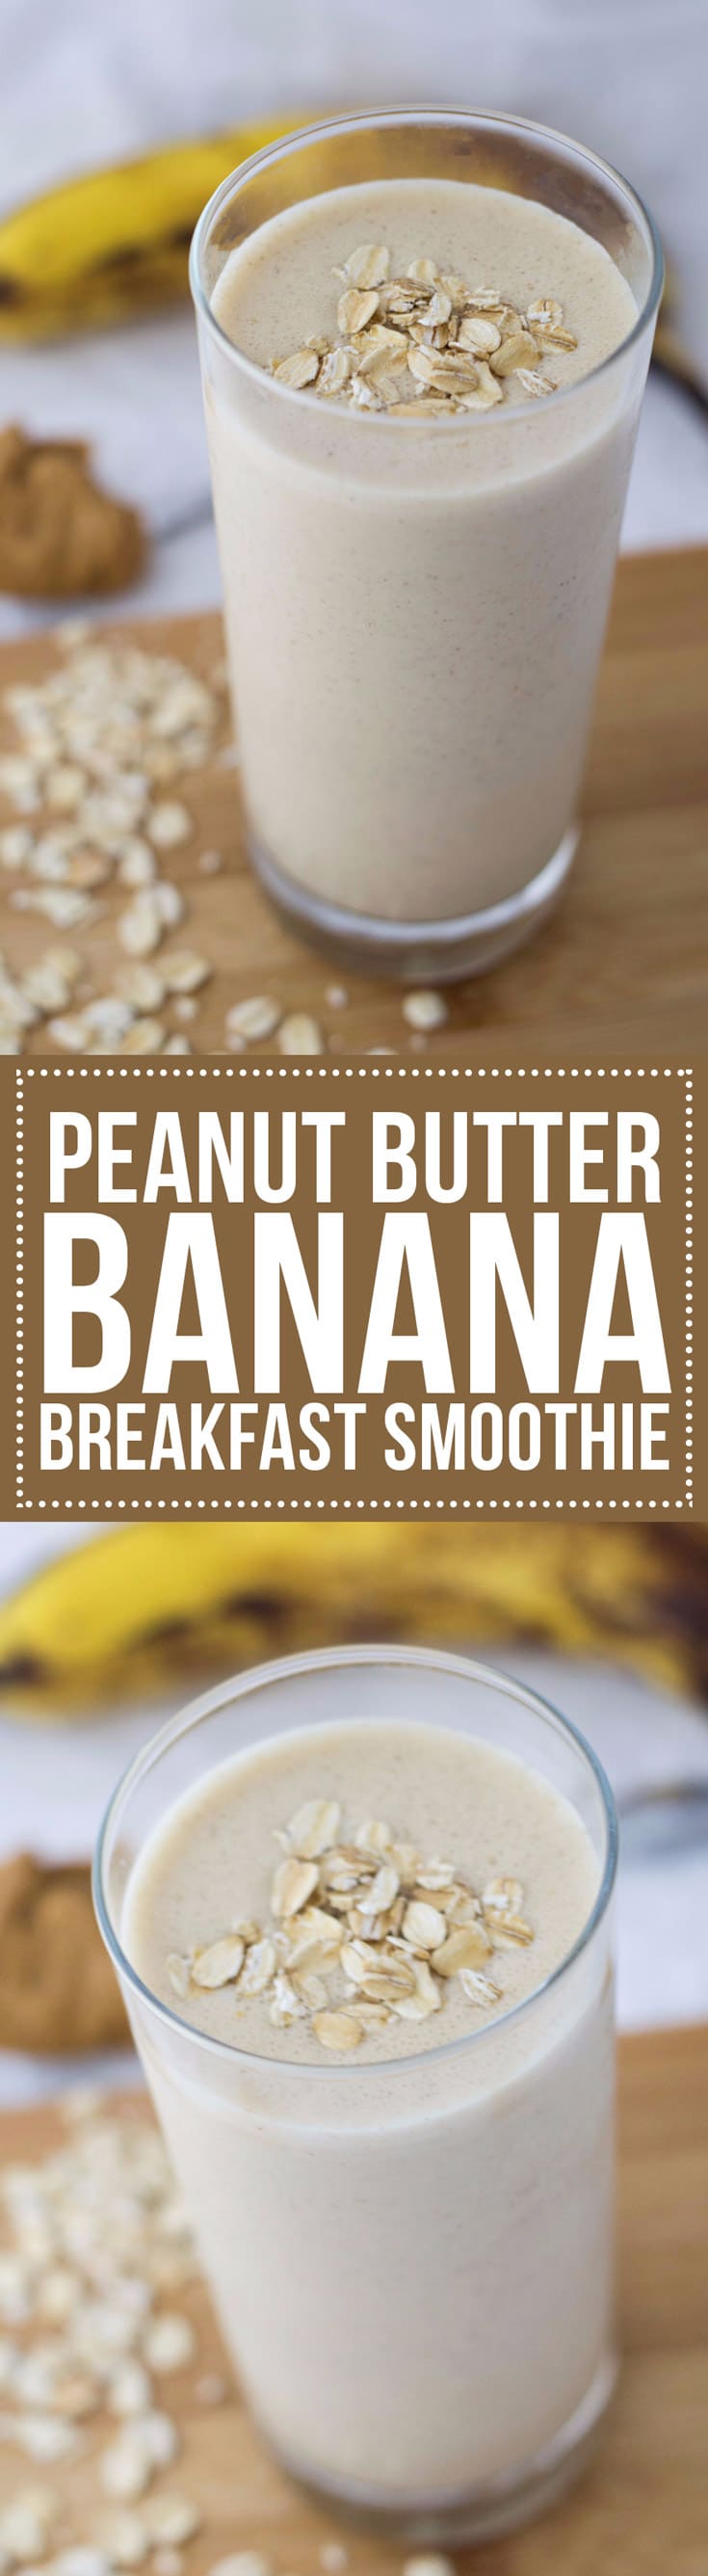 A Peanut Butter Banana Breakfast Smoothie is the perfect way to start the day! With 16 grams of protein, it'll fill you up too.